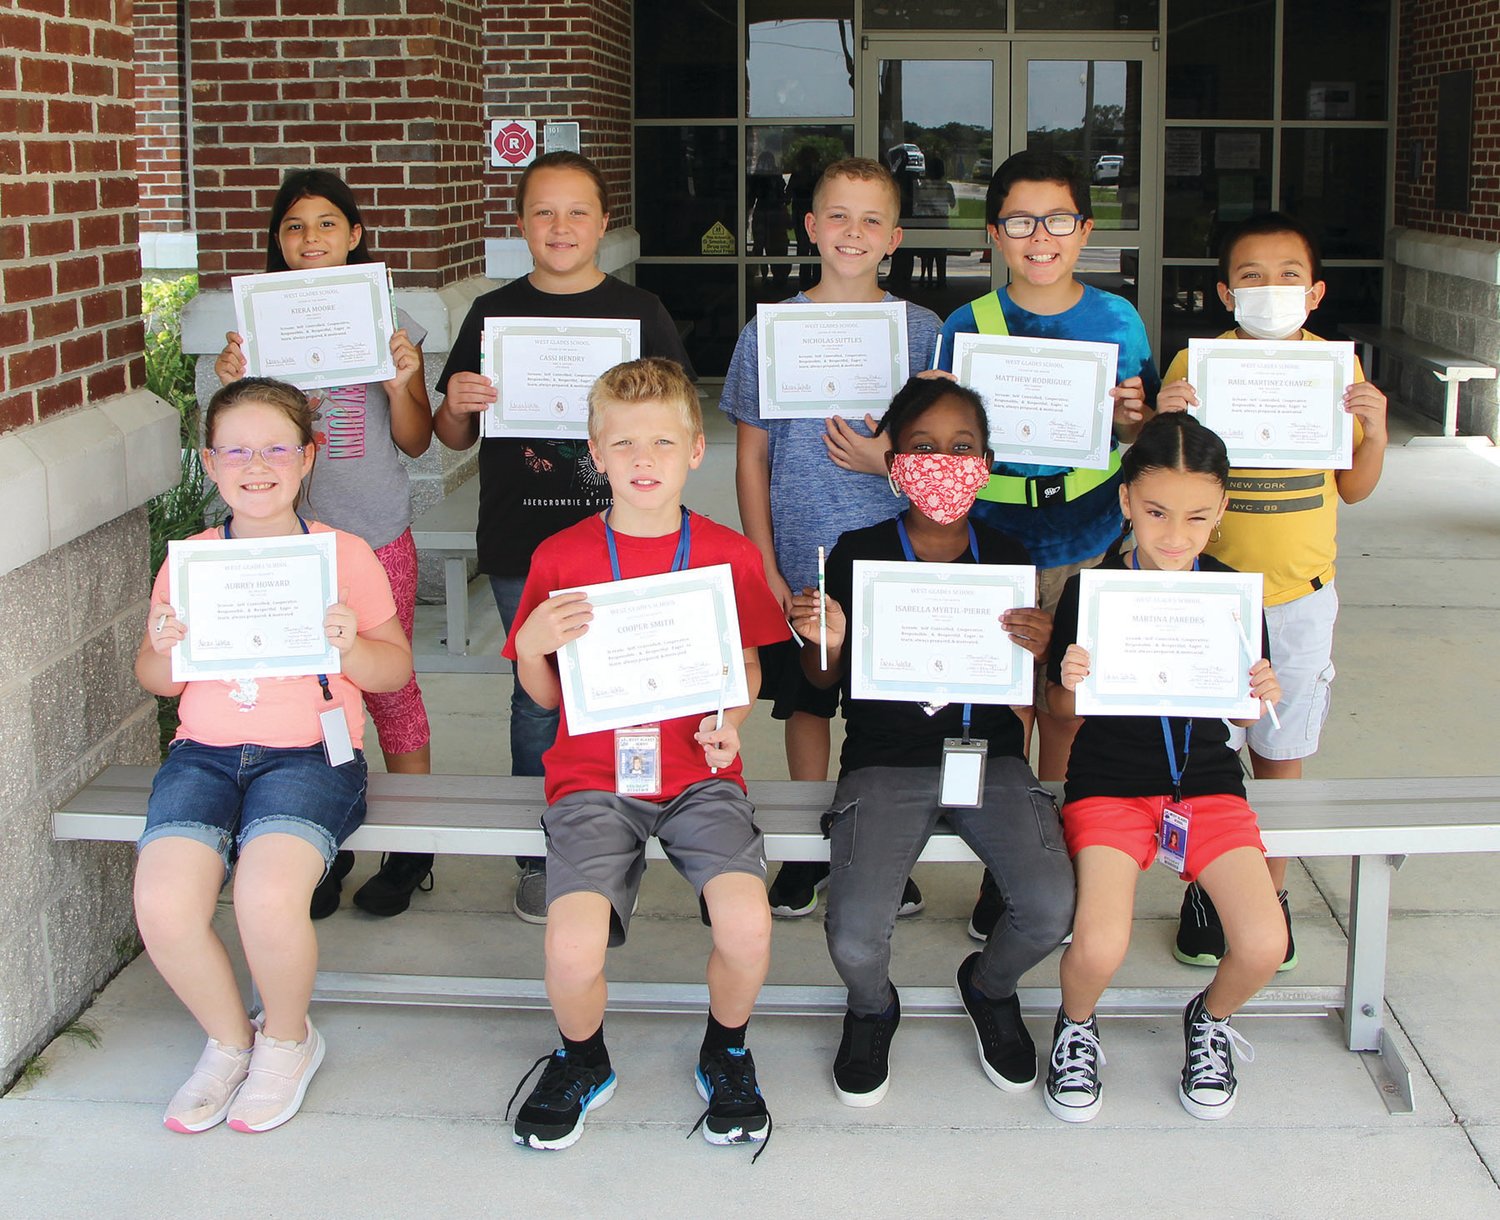 Third through fifth grade: Isabella Myrtil-Pierre, Aubrey Howard, Martina Paredes, Cooper Smith, Keira Moore, Cassi Hendry, Nicholas Suttles, Raul Martinez-Chavez and Matthew Rodriguez.
Not Pictured: Giovanni Cuacua and Ashlynn Summeralls.